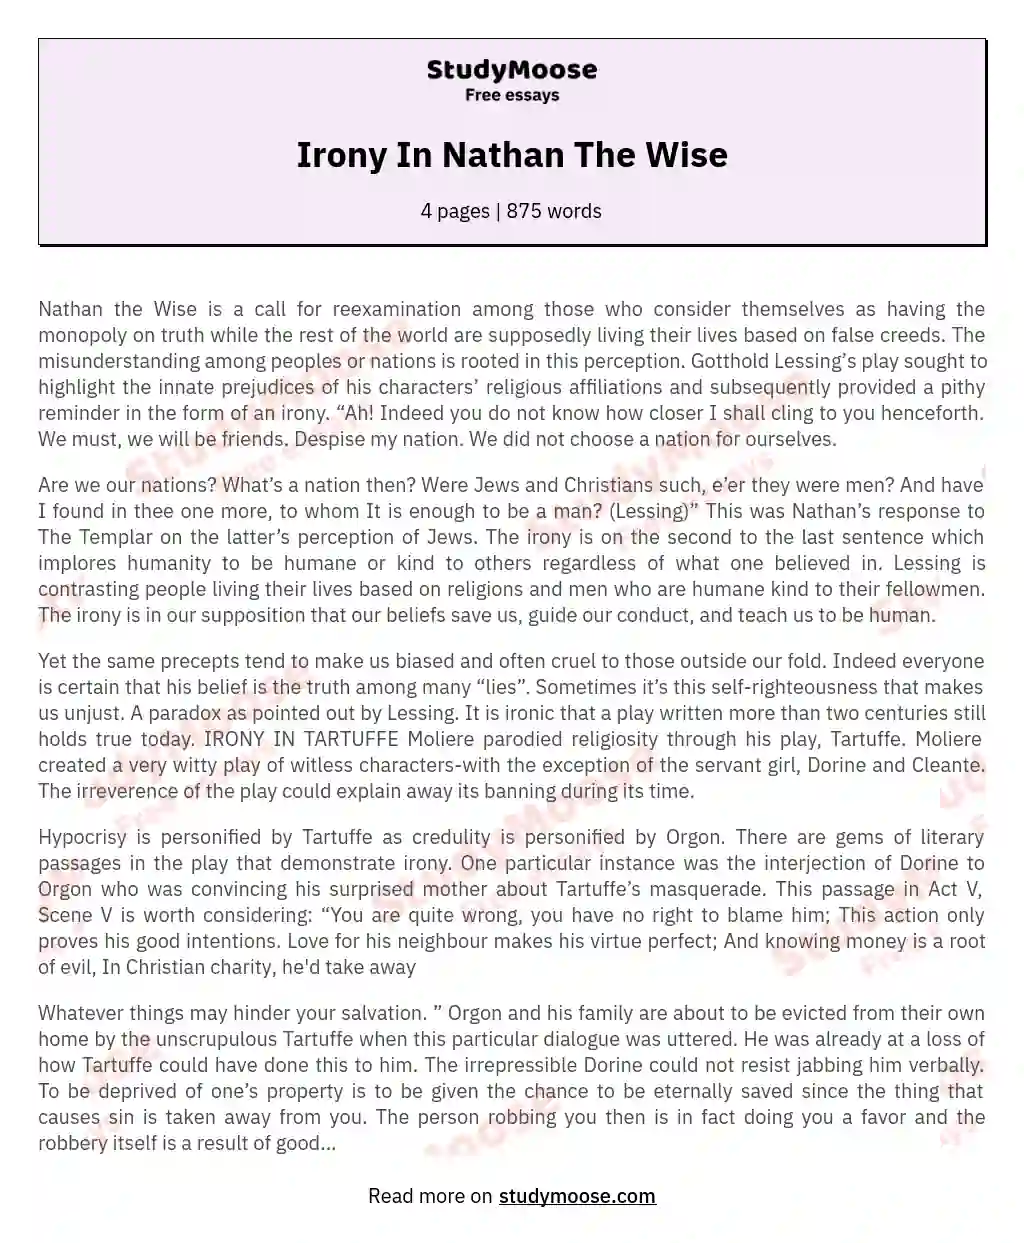 Irony In Nathan The Wise